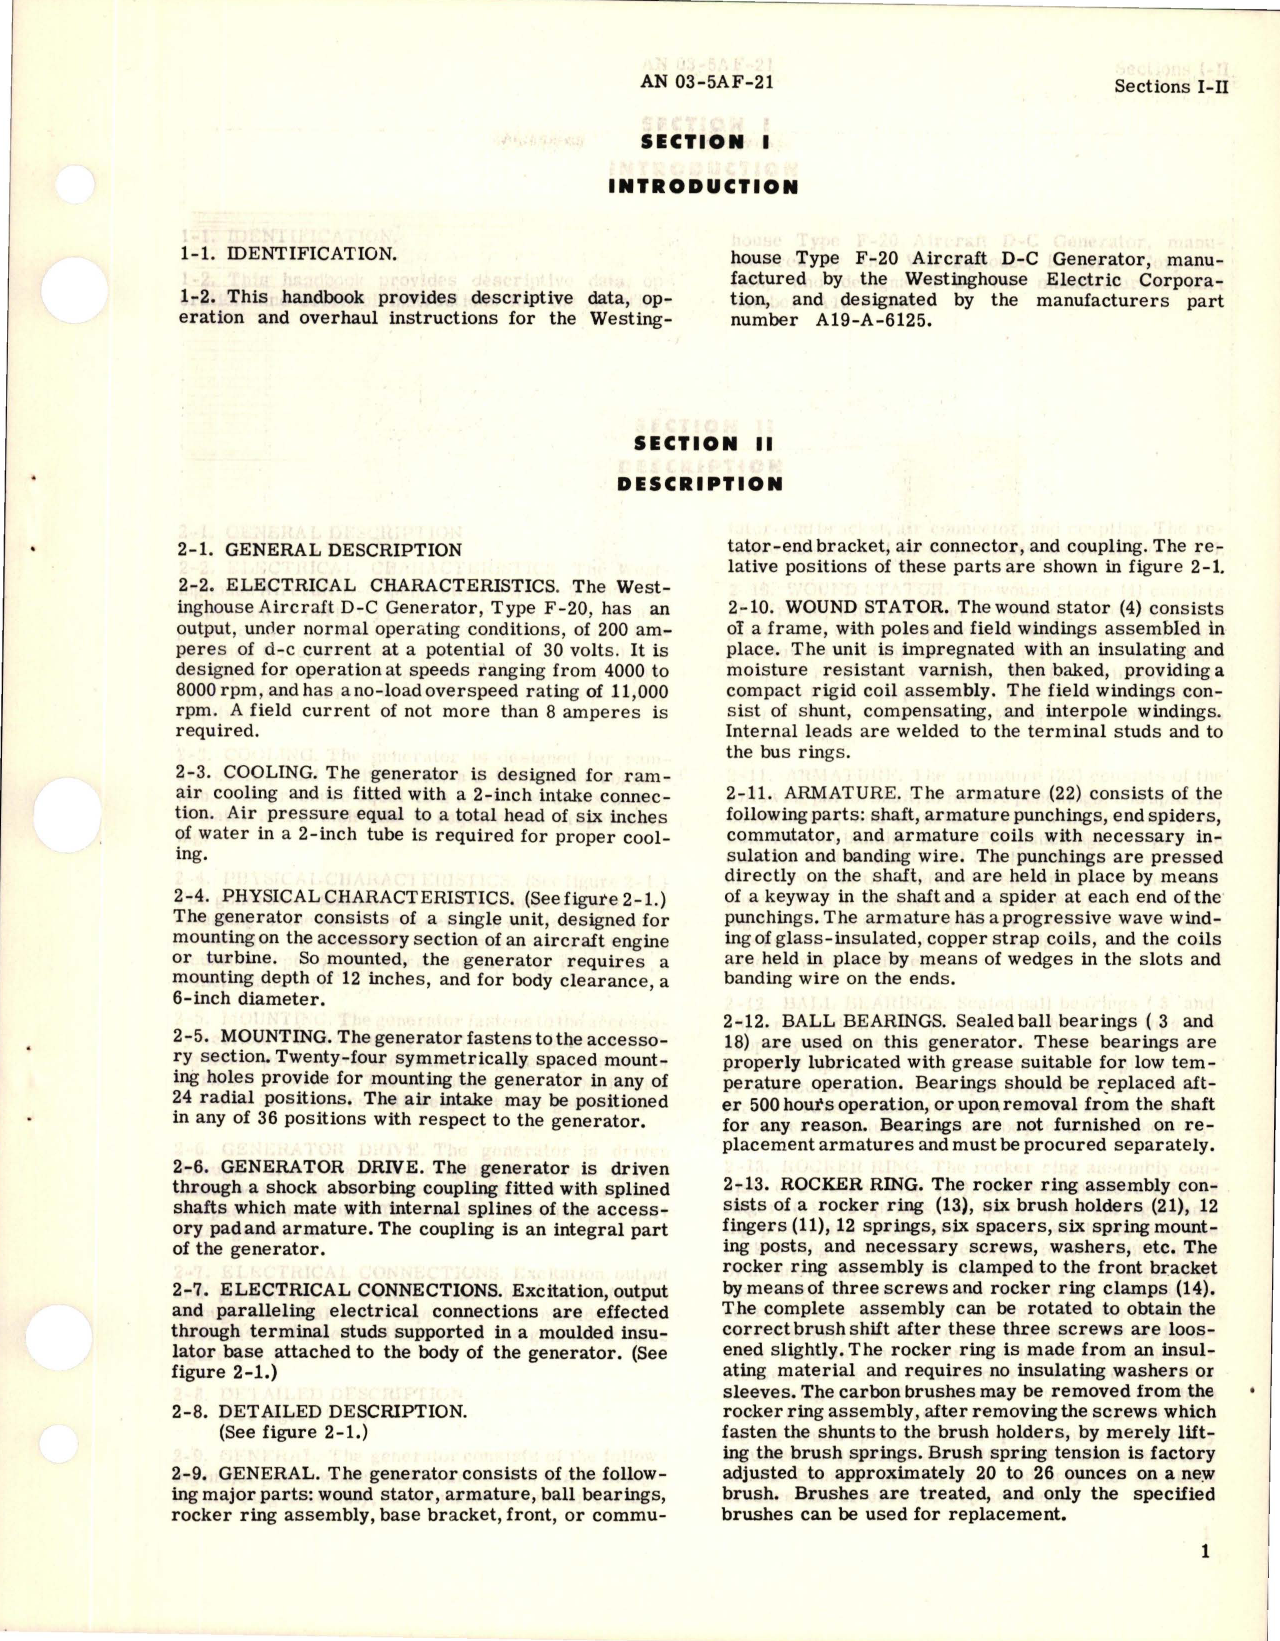 Sample page 5 from AirCorps Library document: Operation, Service and Overhaul Instructions with Parts Catalog for Aircraft DC Generator - Type F-20